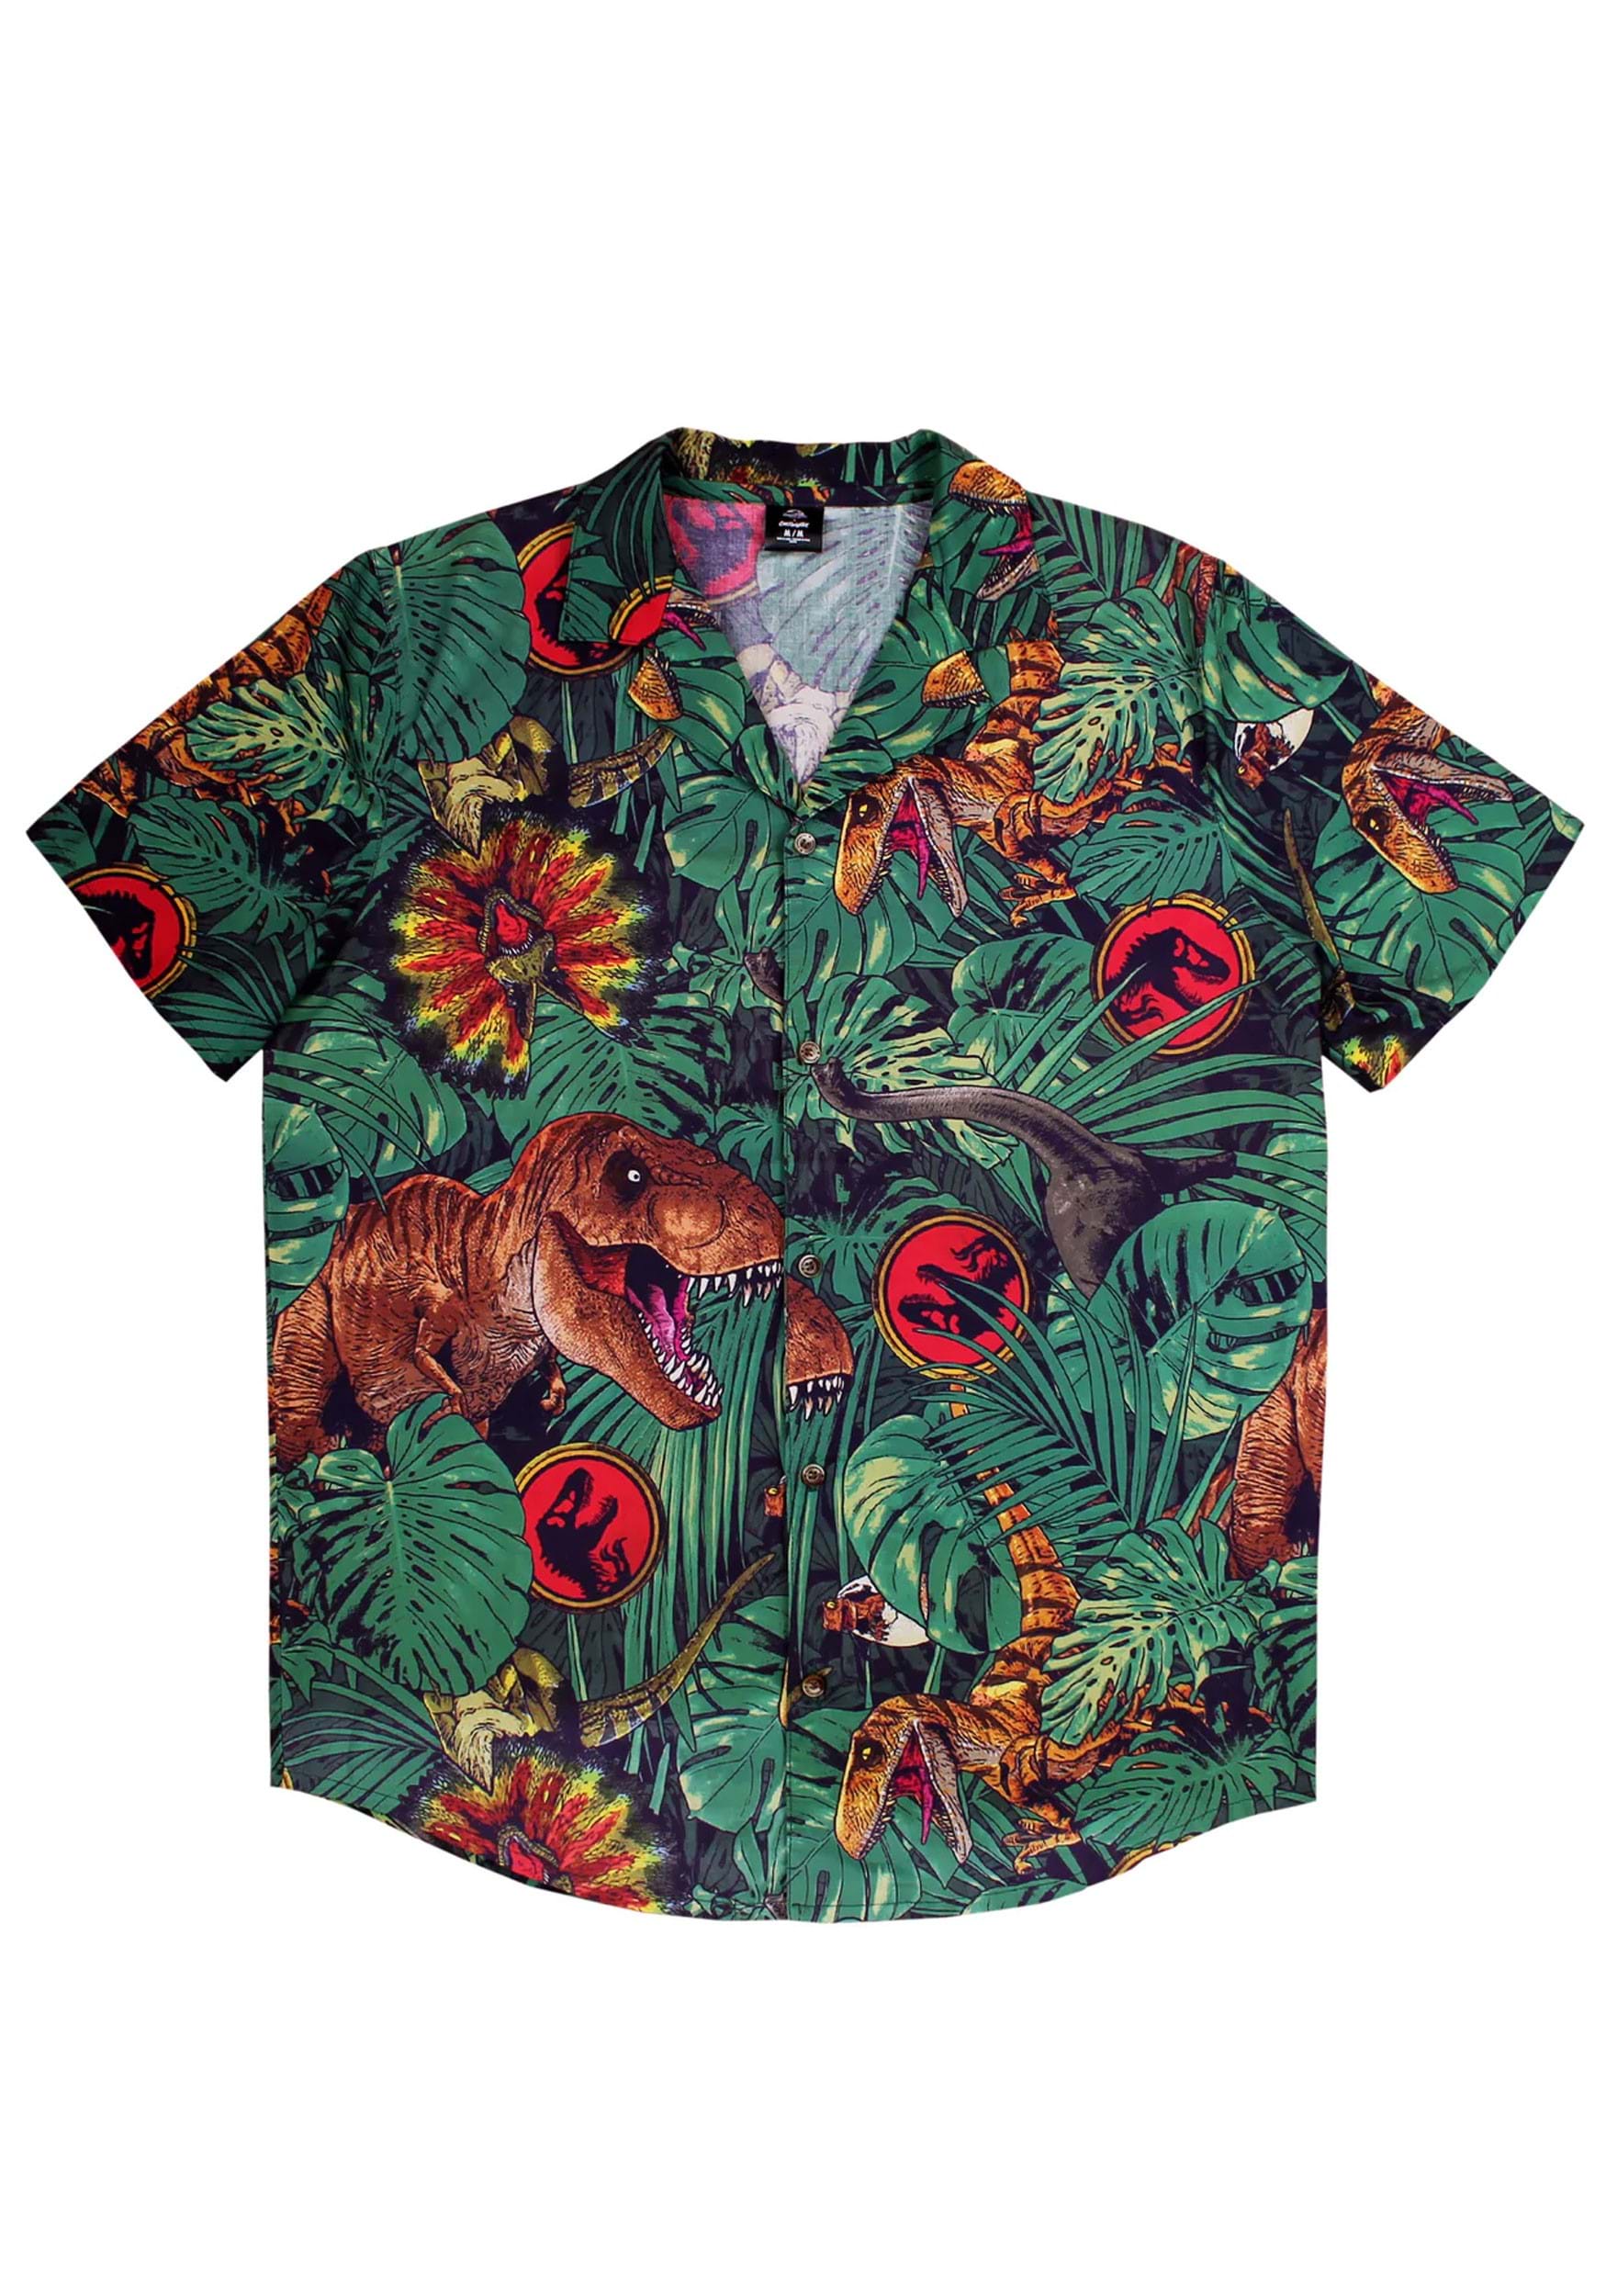 Cakeworthy Jurassic Park Adult Co-ord Top